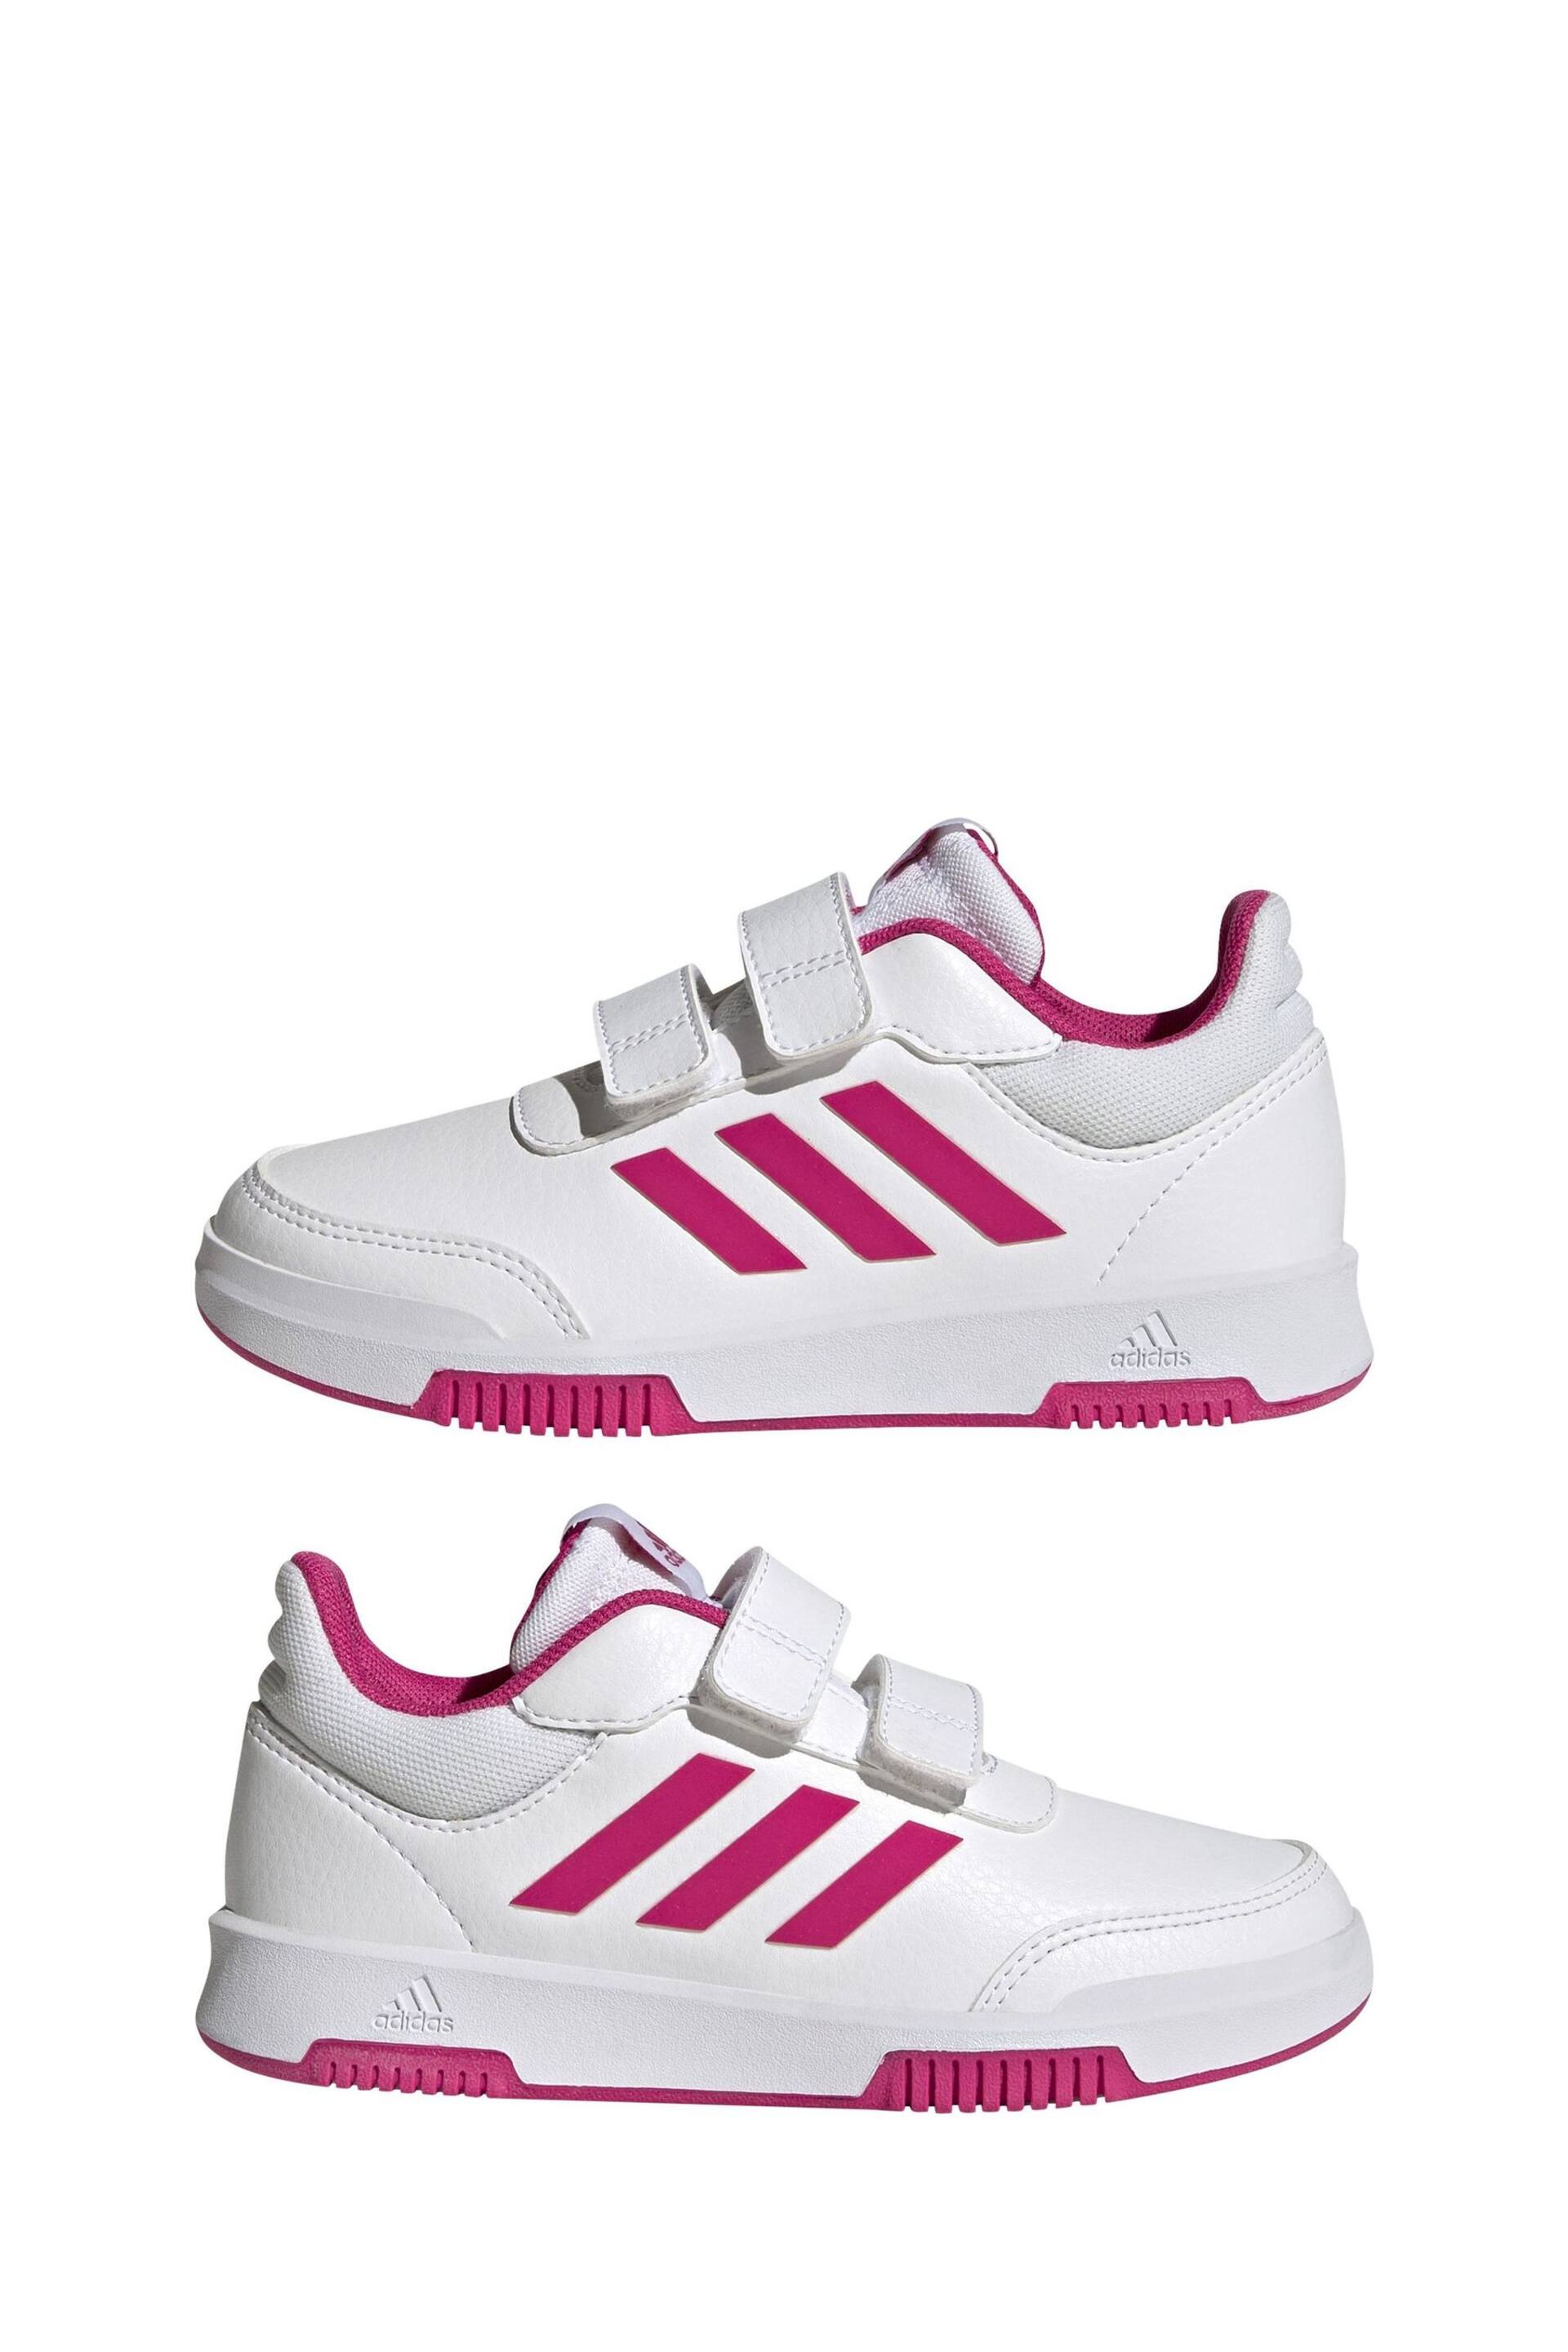 adidas White/Pink Tensaur Hook and Loop Shoes - Image 4 of 9